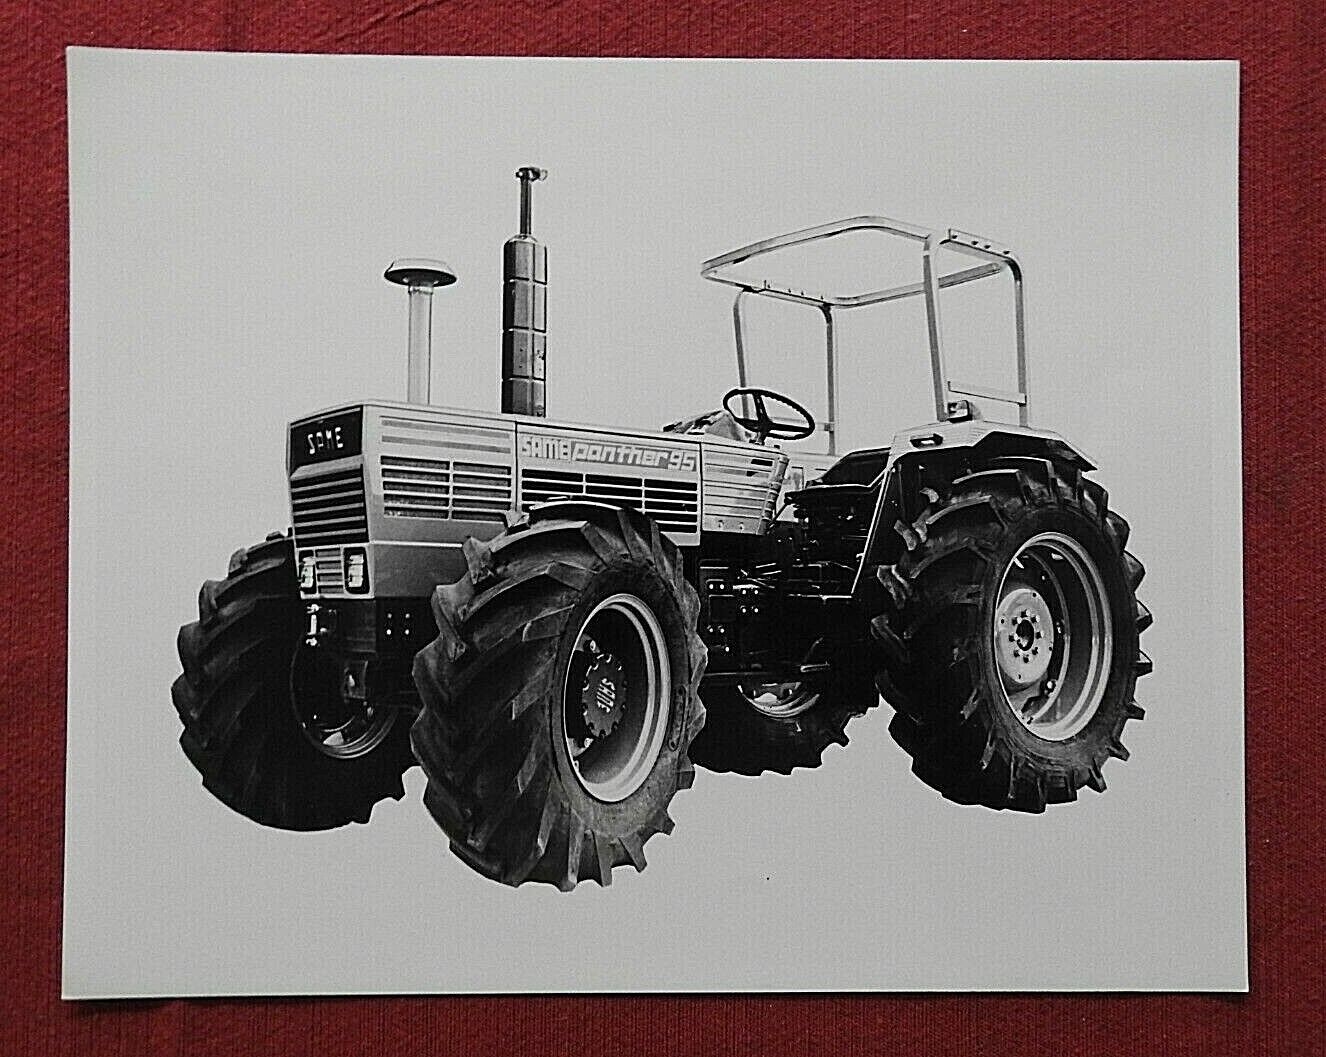 1979-1981 SAME PANTHER 95 TRACTOR GLOSSY 8X10 ORIGINAL FACTORY PHOTOGRAPH MINTY